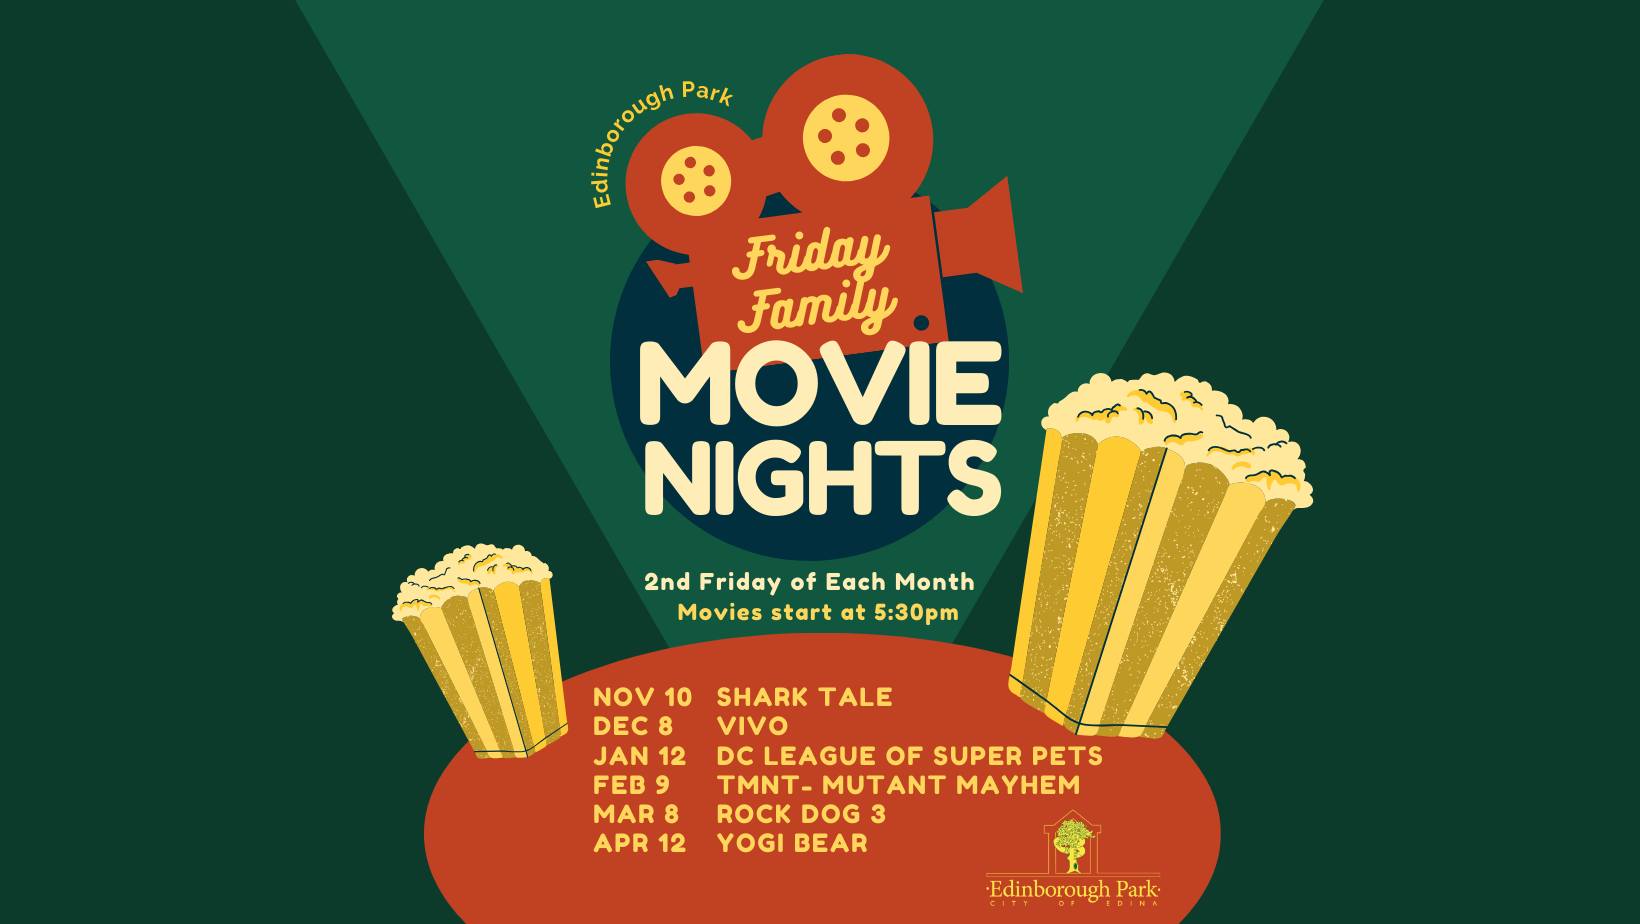 Friday Family Movie Night poster with movie titles and dates. 